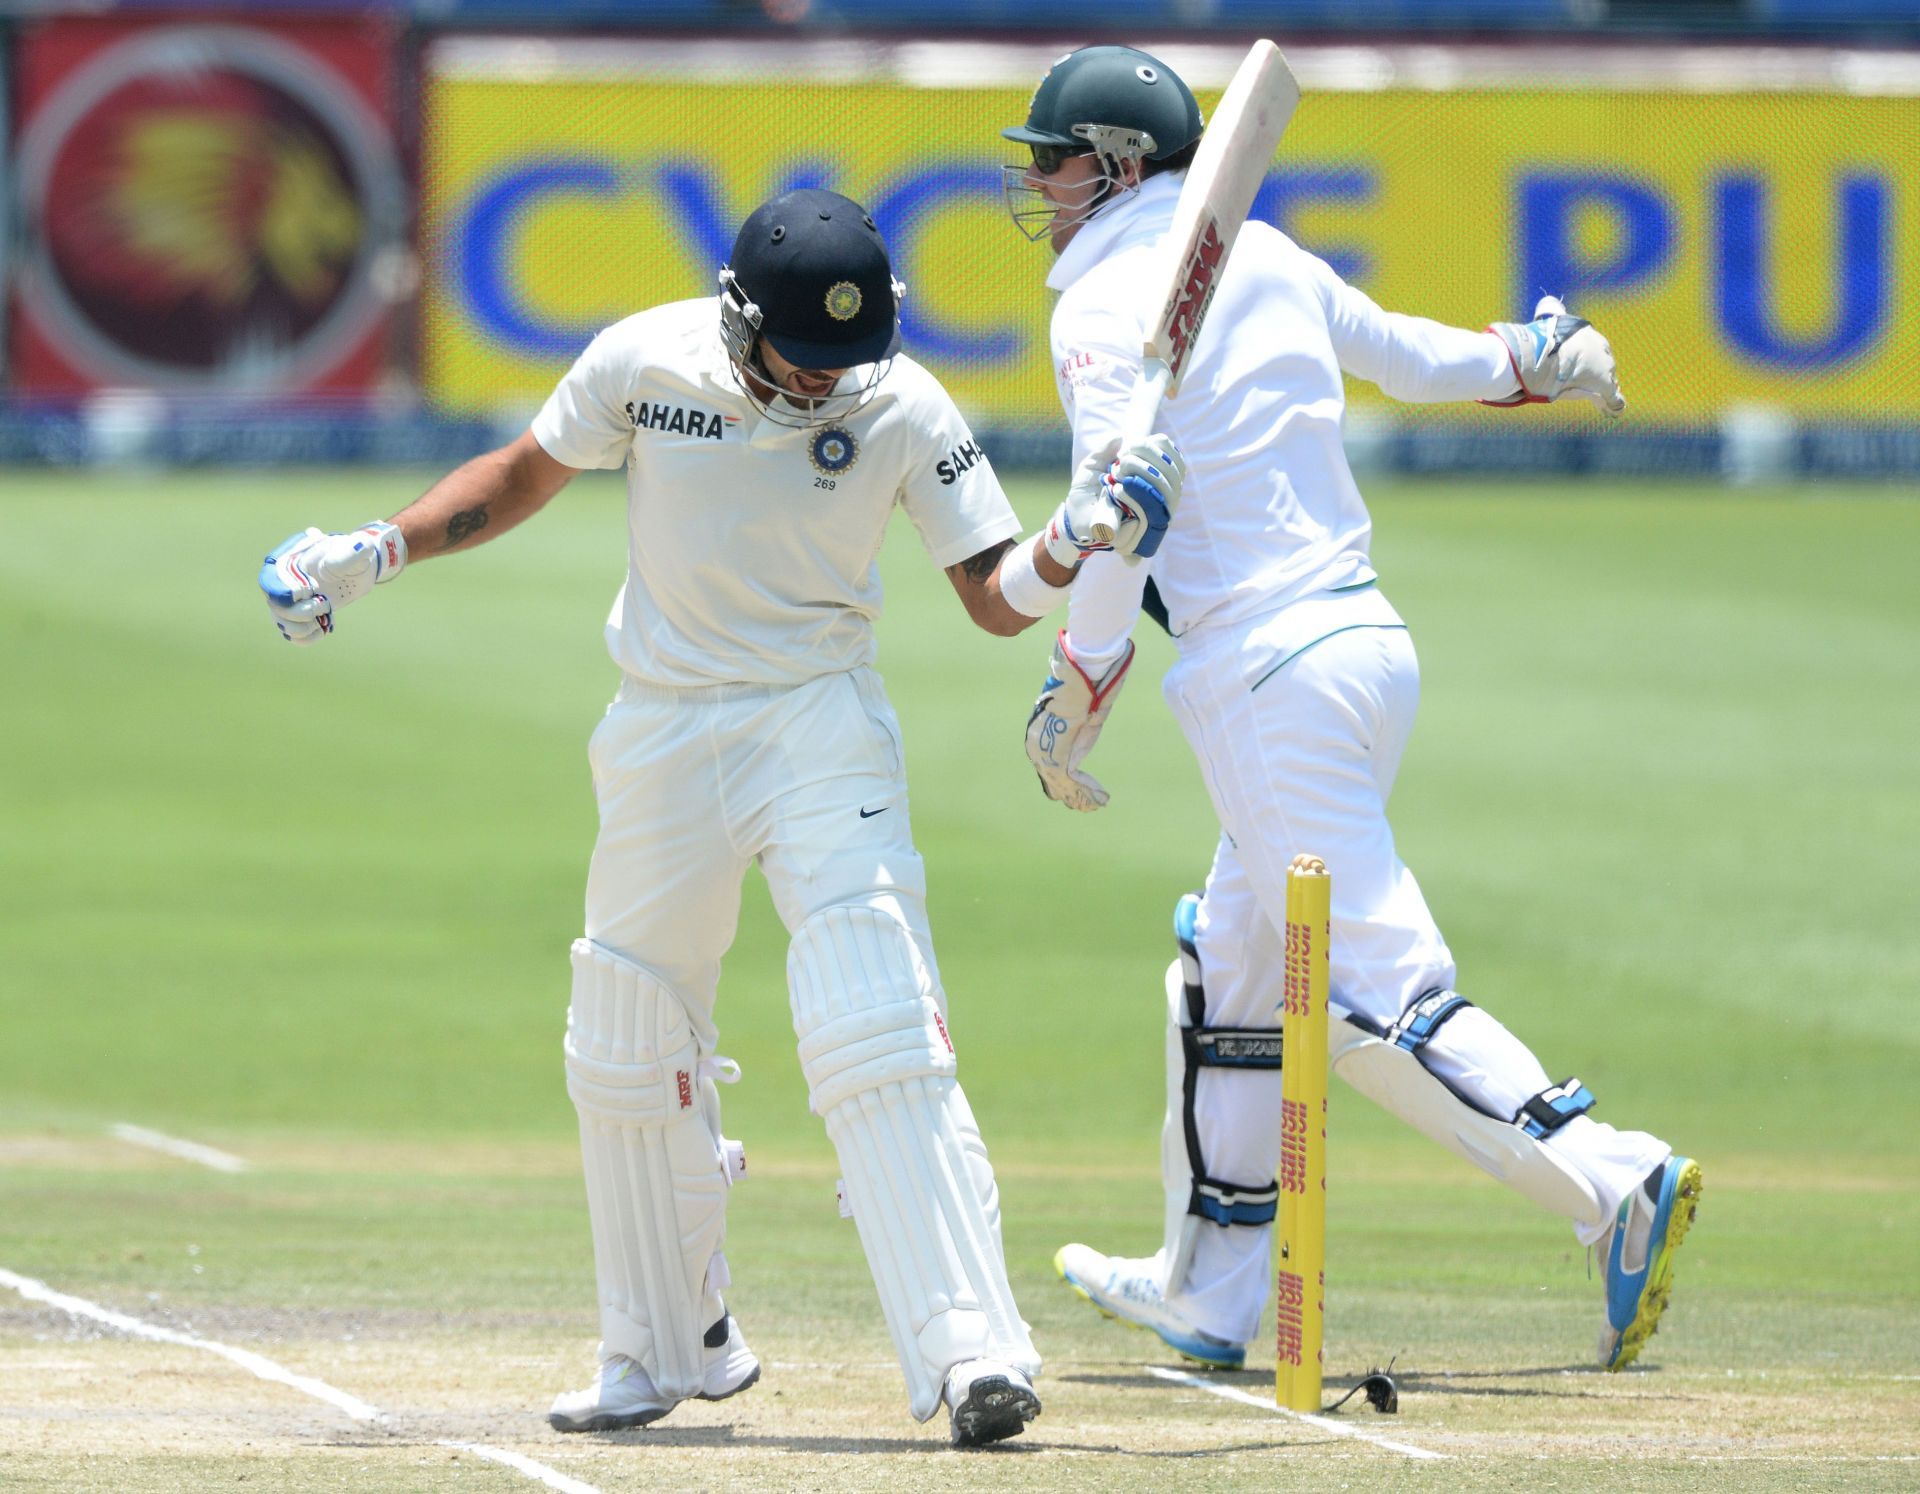 Virat Kohli loses his wicket for 96 runs during day 4 of the 2013 Wanderers Test. Pic: Getty Images